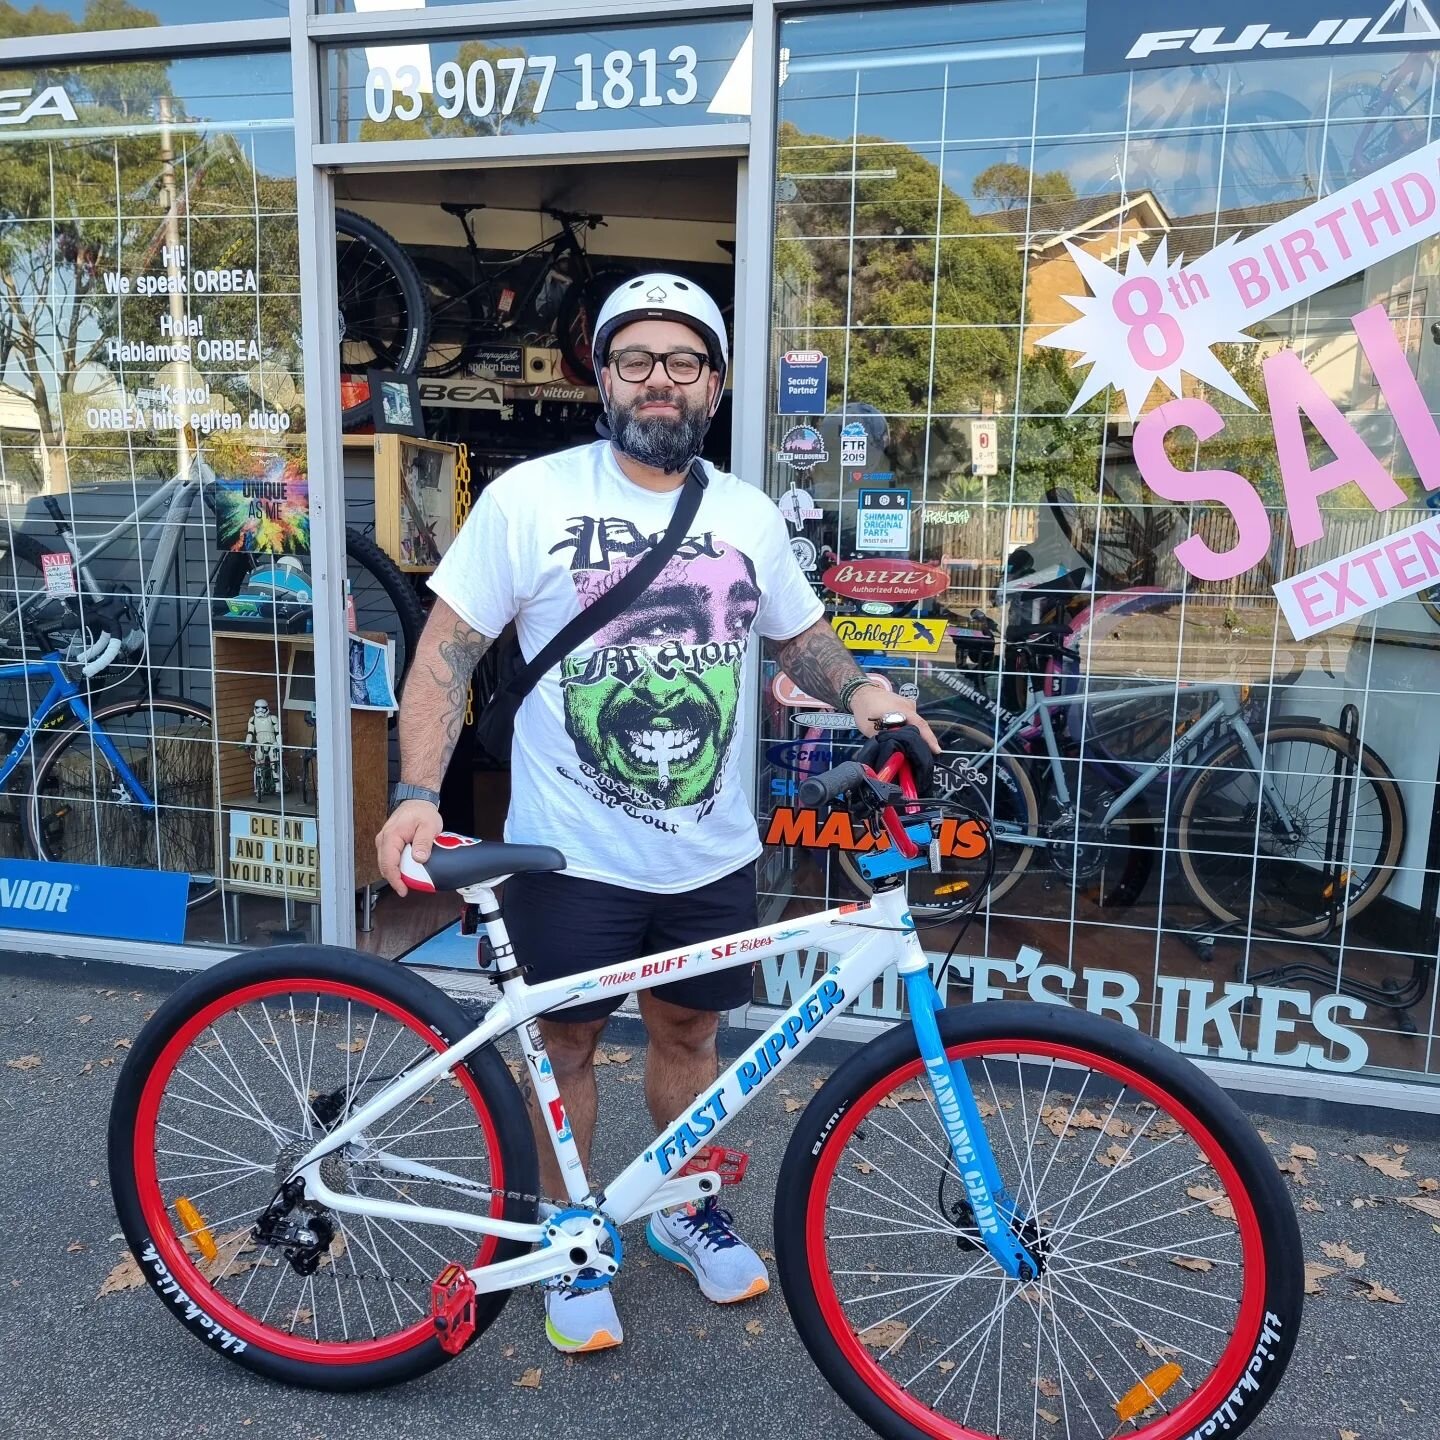 Tony knows a great bike when he sees one. Great pick-up an SE Bikes Fast Ripper Mike Buff #enjoy . #sebikesatwhitesbikes #sebikes #sebikesfastripper @sebikesaus @sebikes @mikebuff_ @thewoodenfloorco